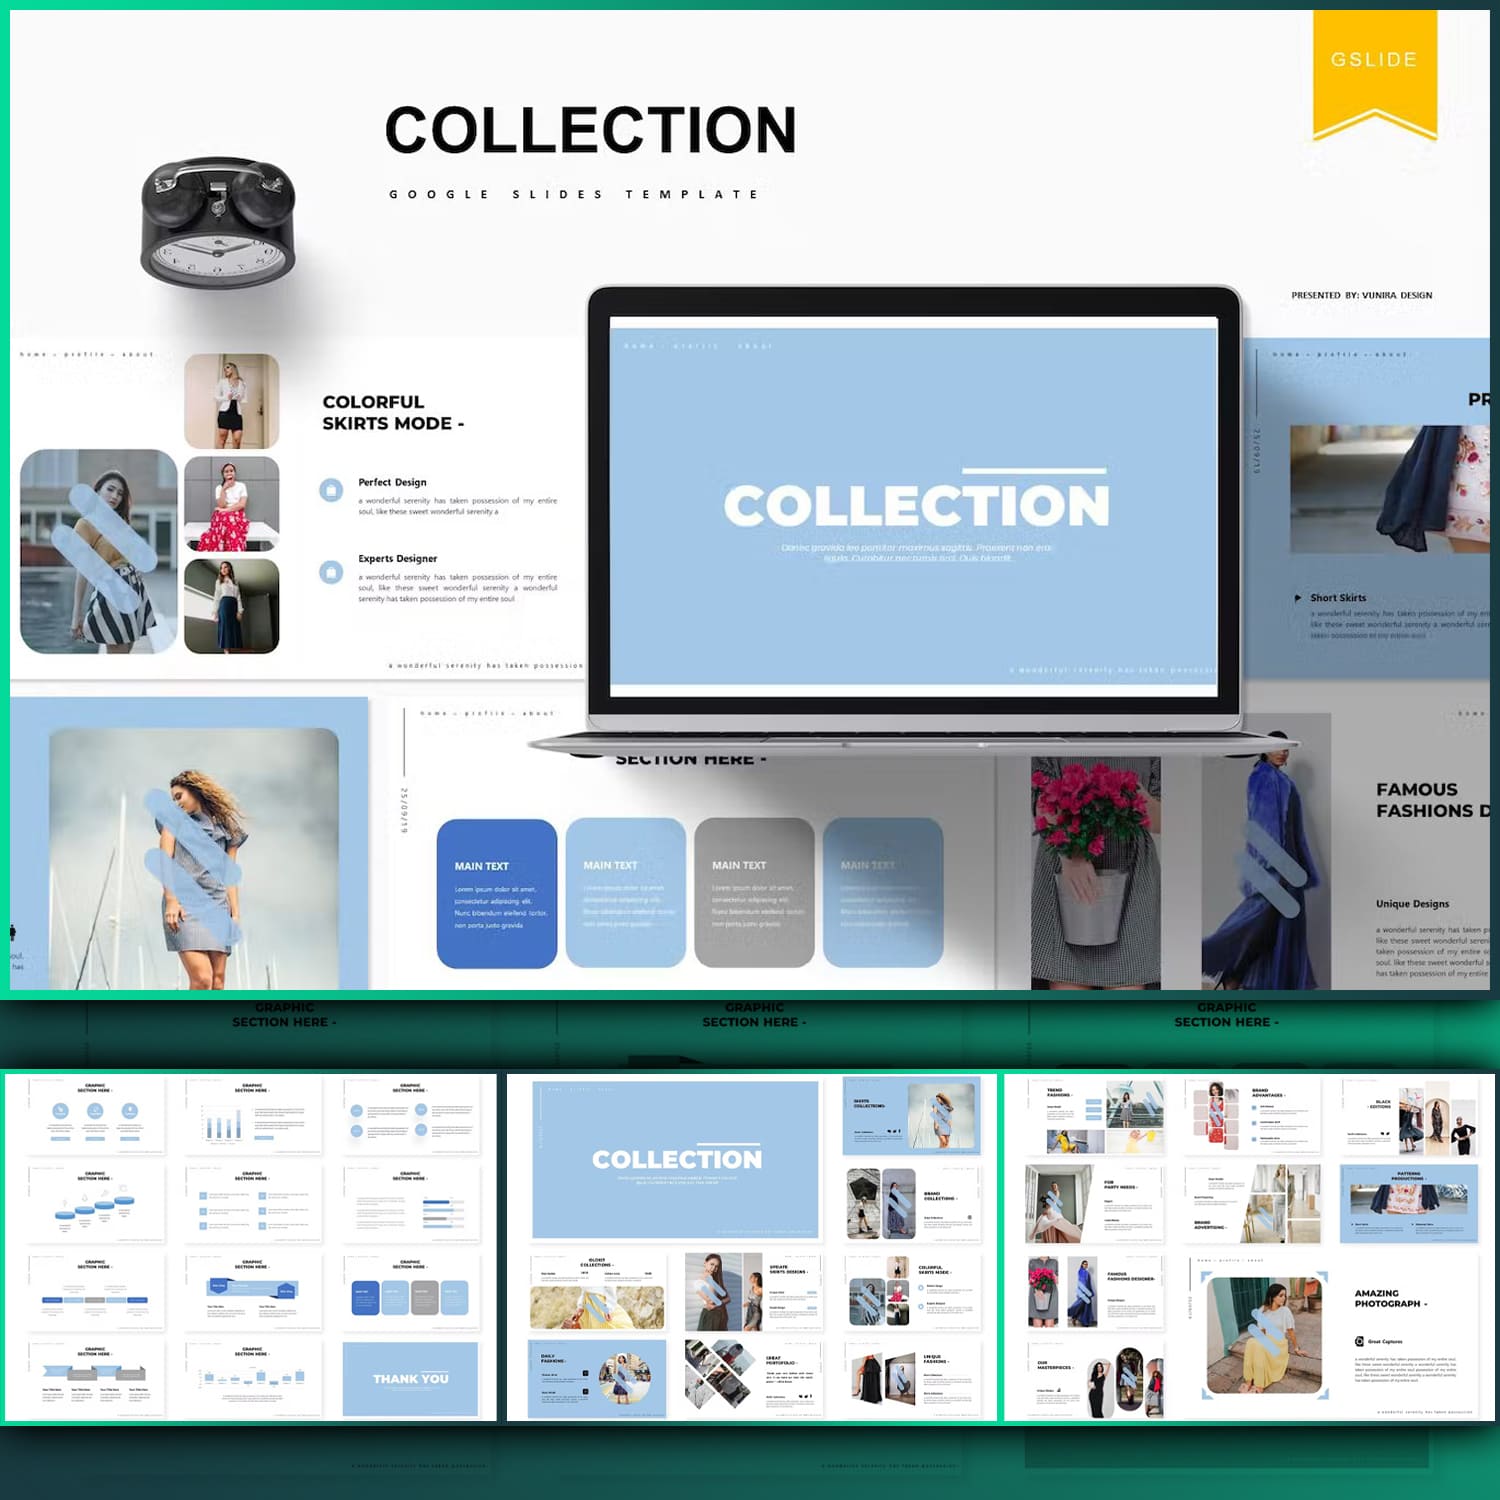 Preview Collection Google slides template on the laptop.